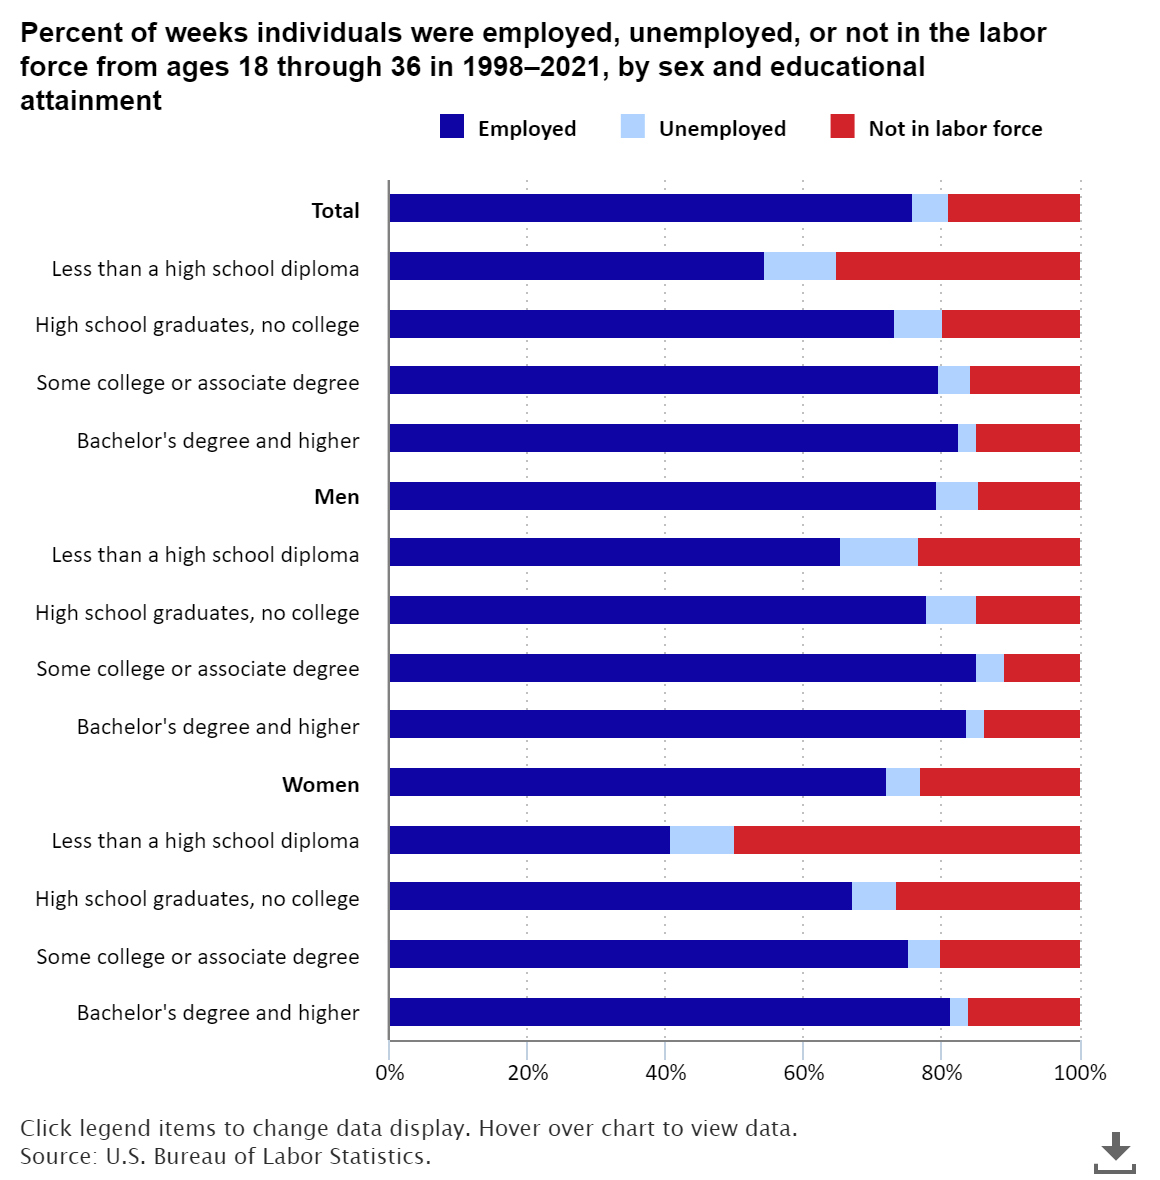 Labor force participation increased by education level for Americans born from 1980 to 1984 bls.gov/opub/ted/2024/… #BLSdata